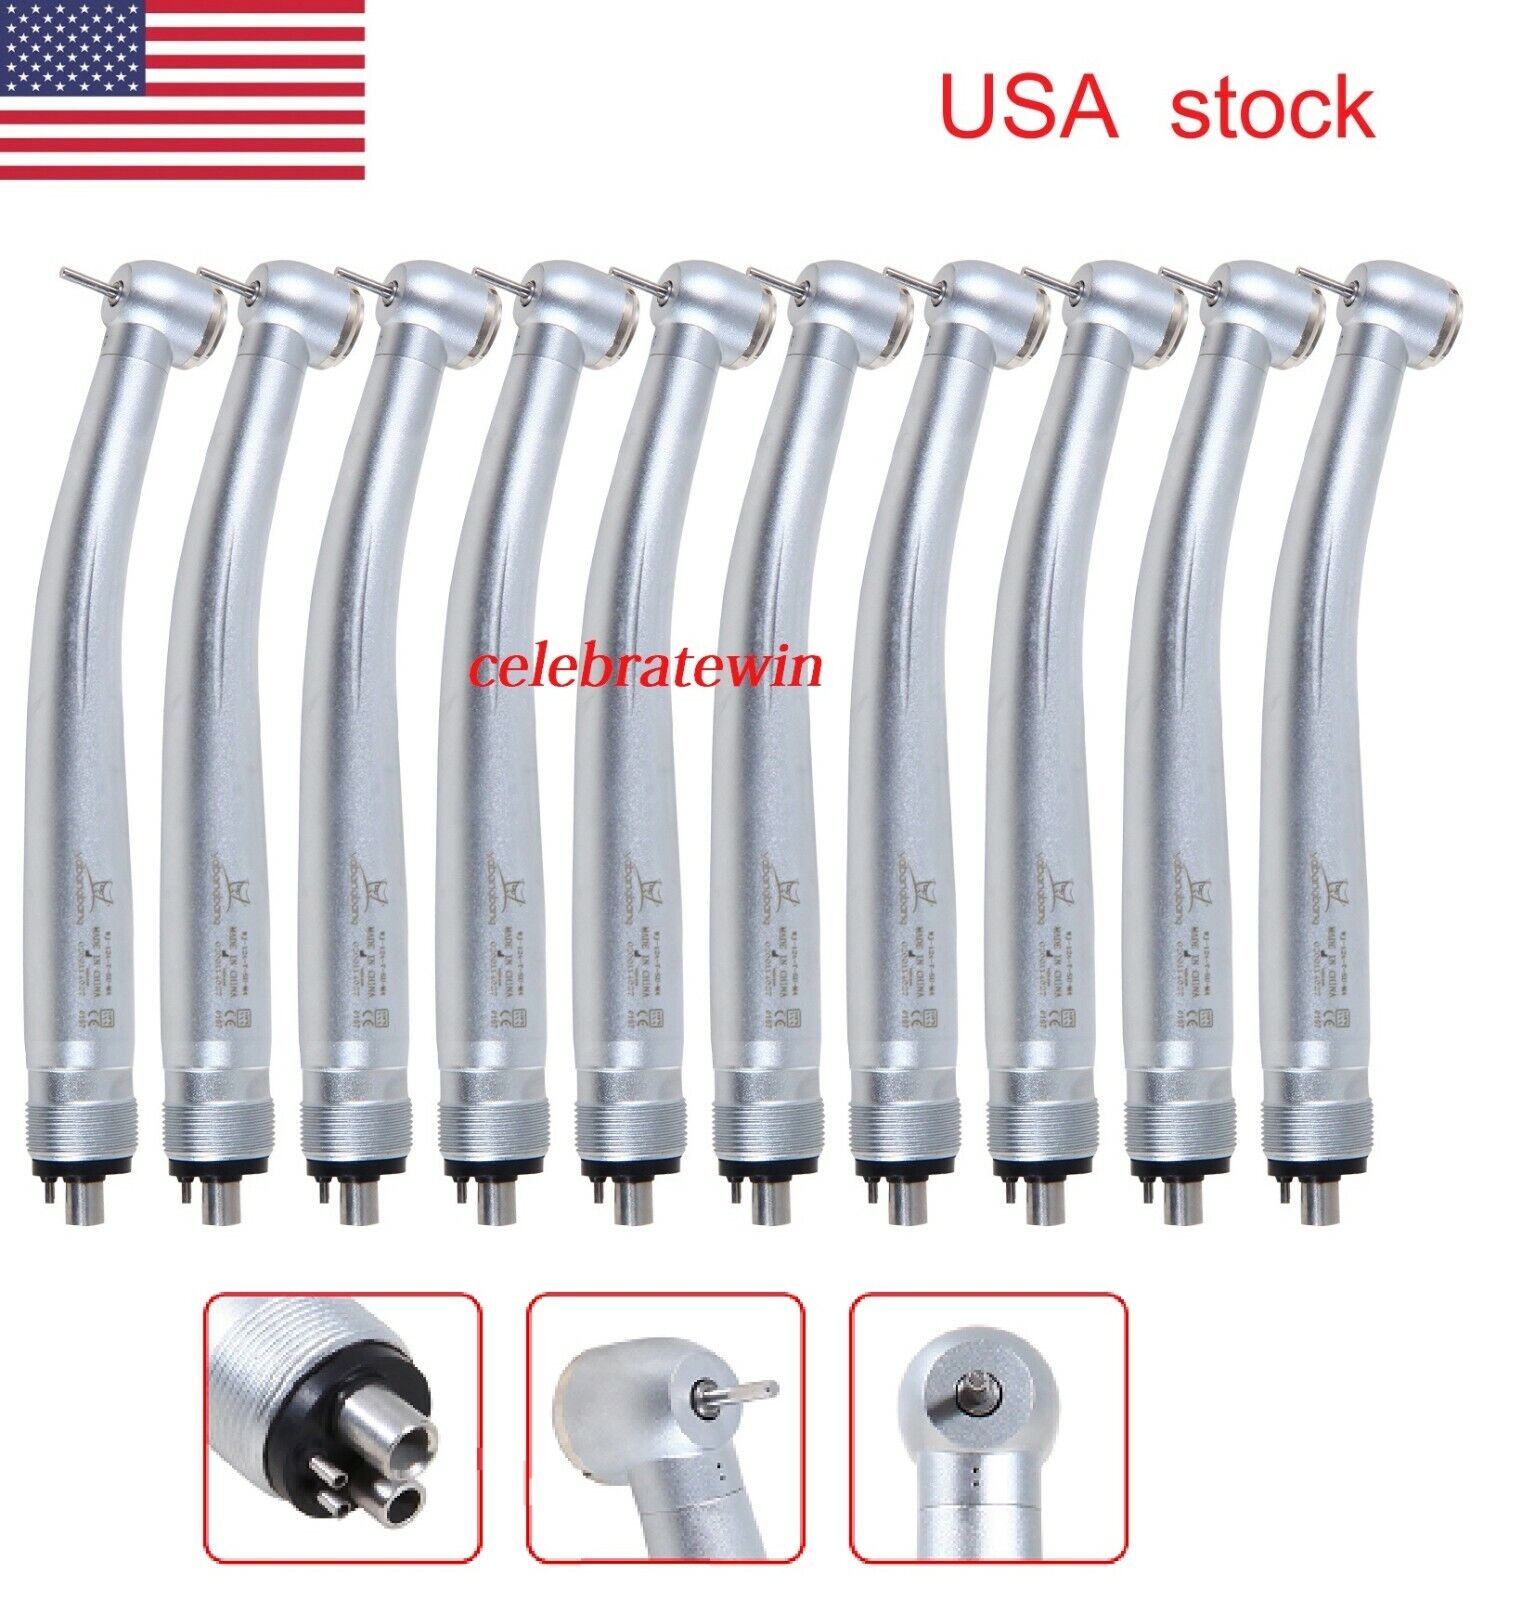 New York Mall 10pcs Dental PANA MAX NSK Style But Push Handpiece High Speed 4H Max 60% OFF